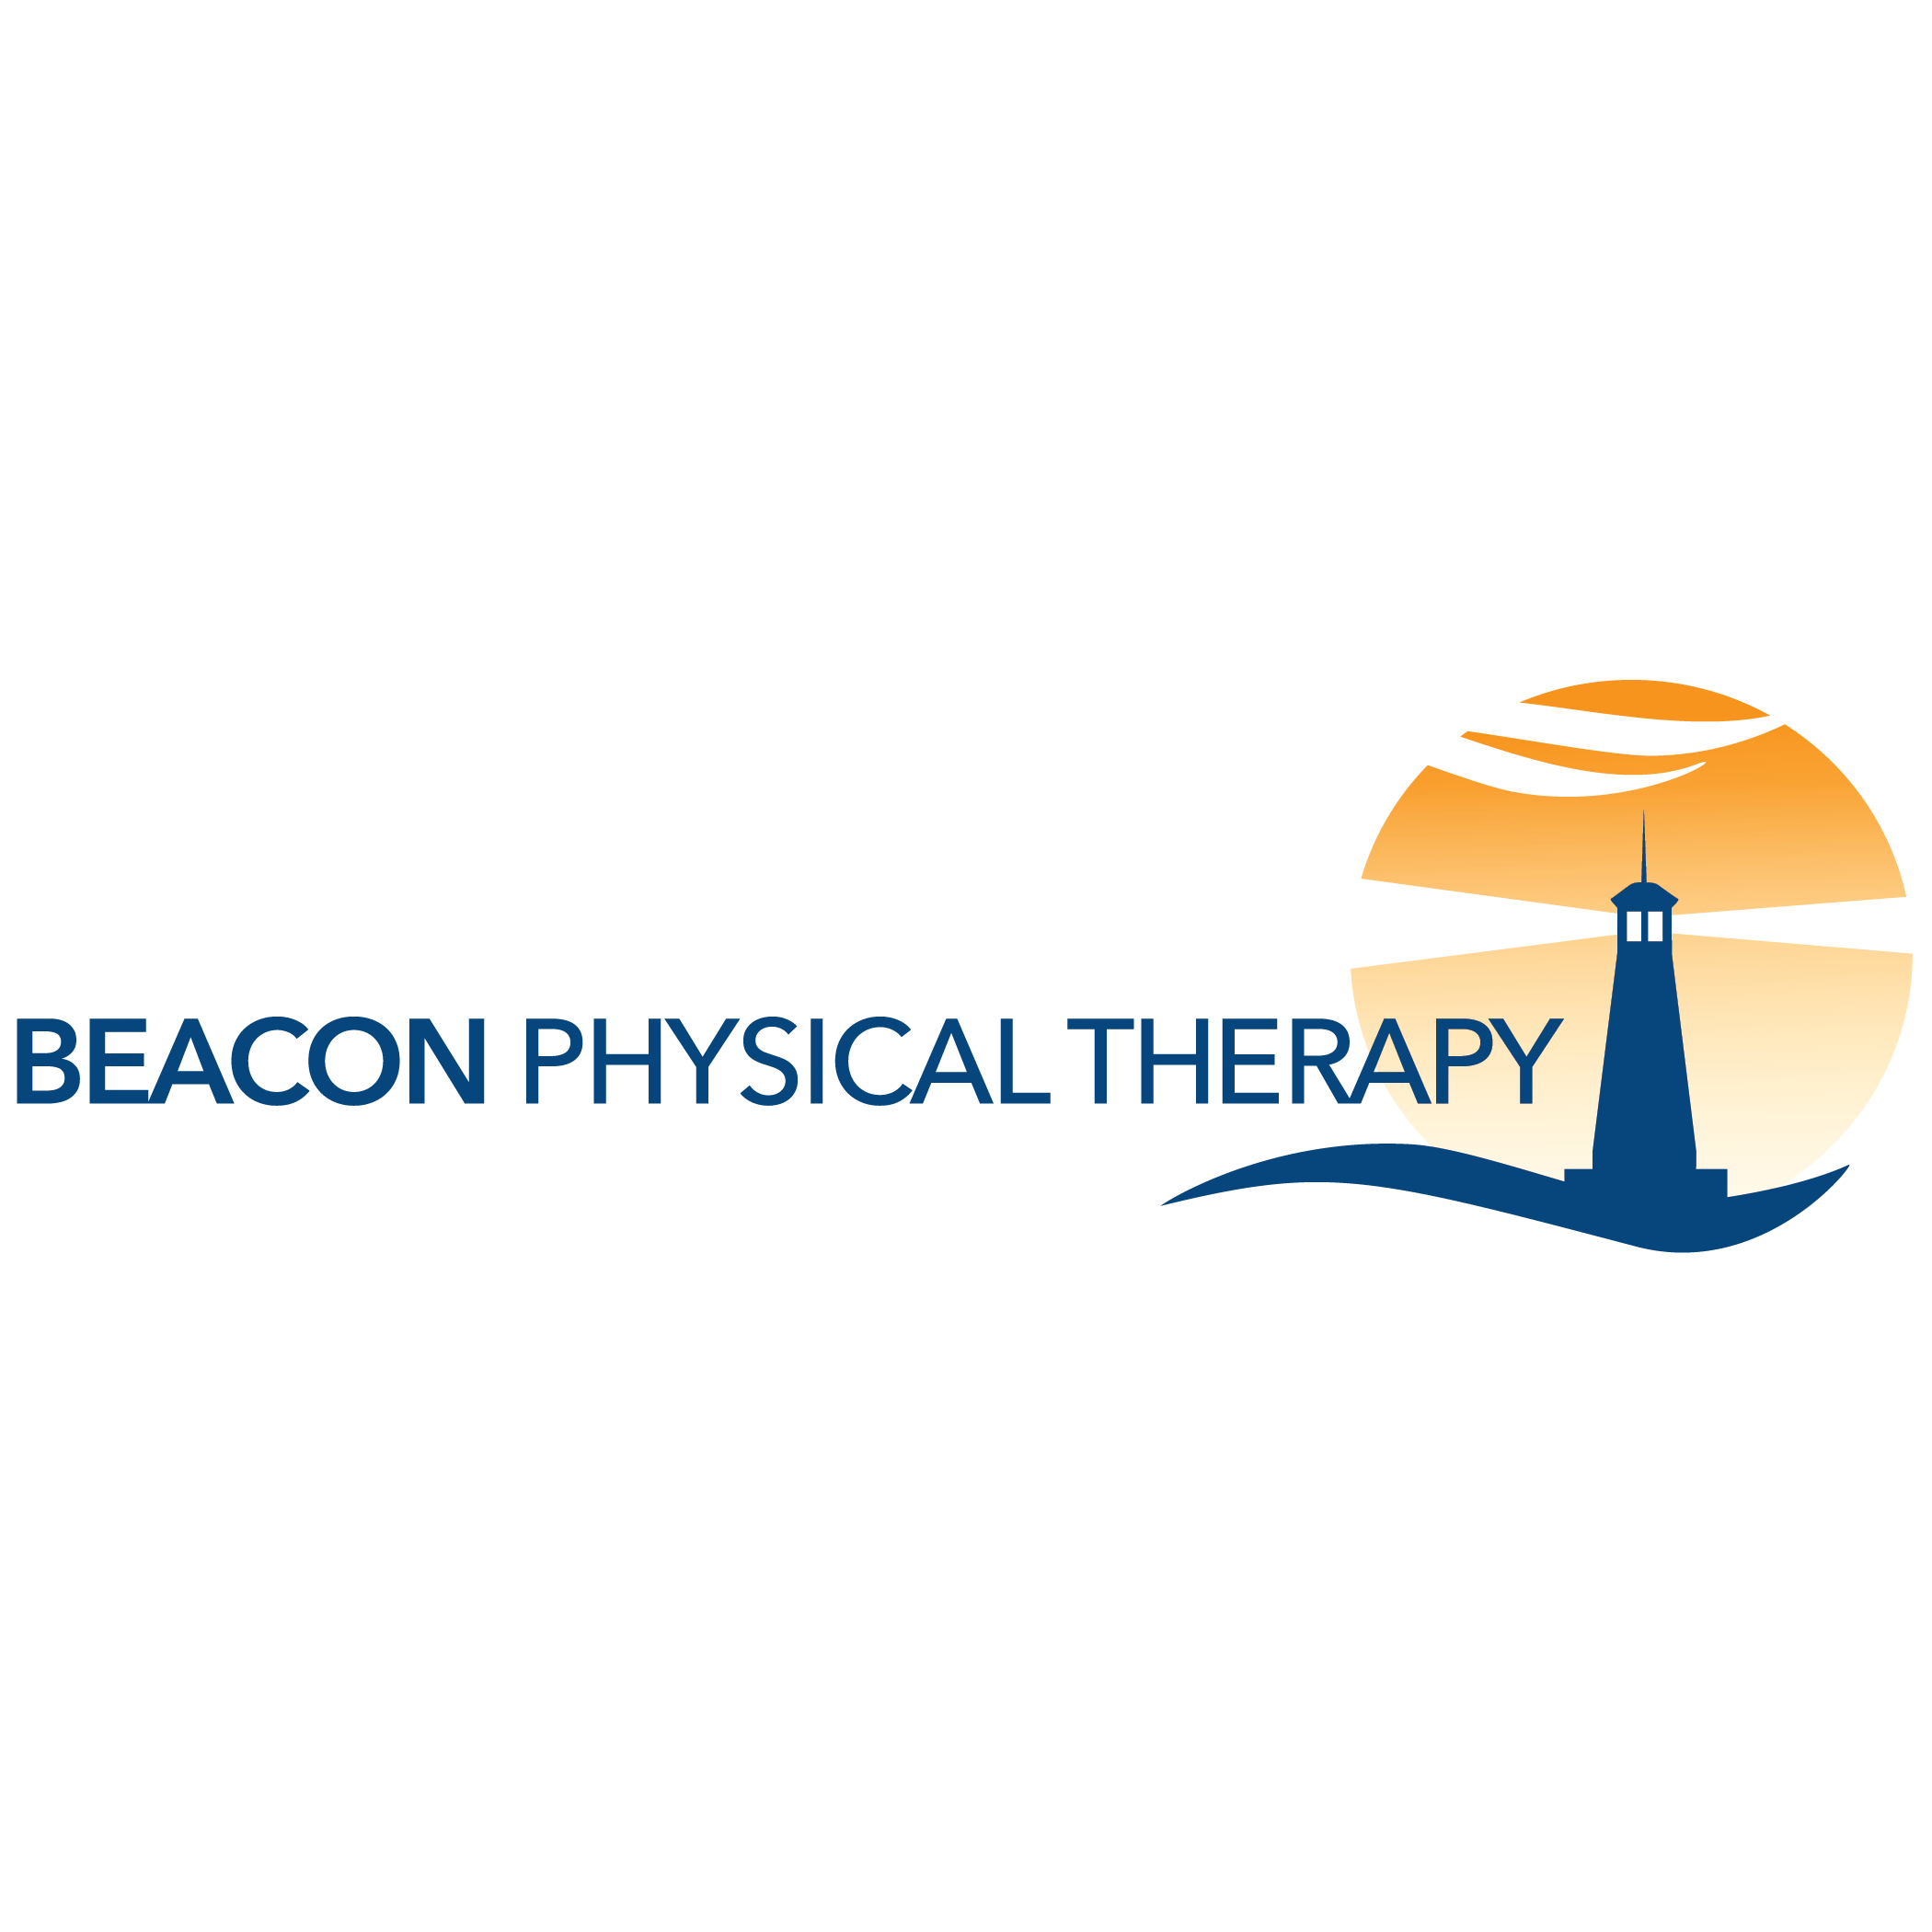 Beacon Physical Therapy Coupons near me in San Francisco ...